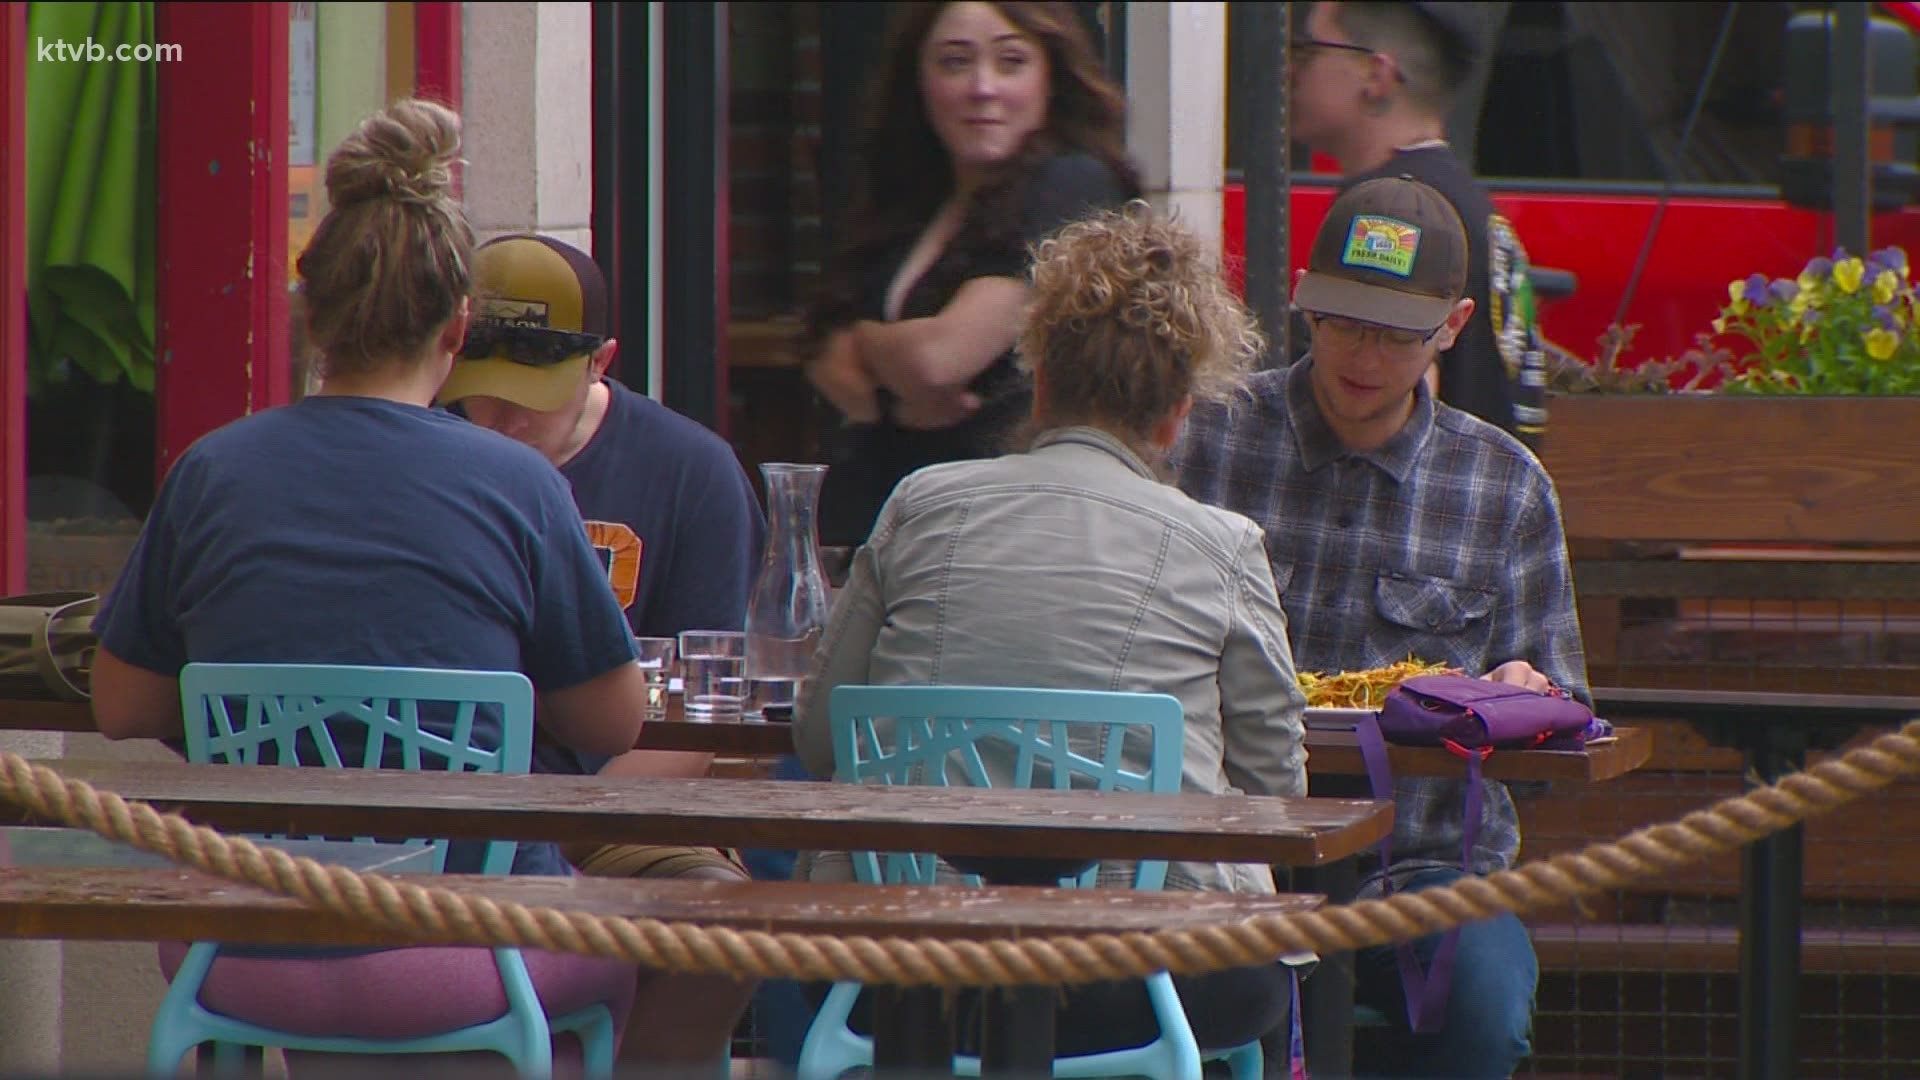 “A lot of people if they can’t sit outside won’t come... so, it could potentially be a big hit," Maryl Seaquist, Office Manager for Cottonwood Grille said.